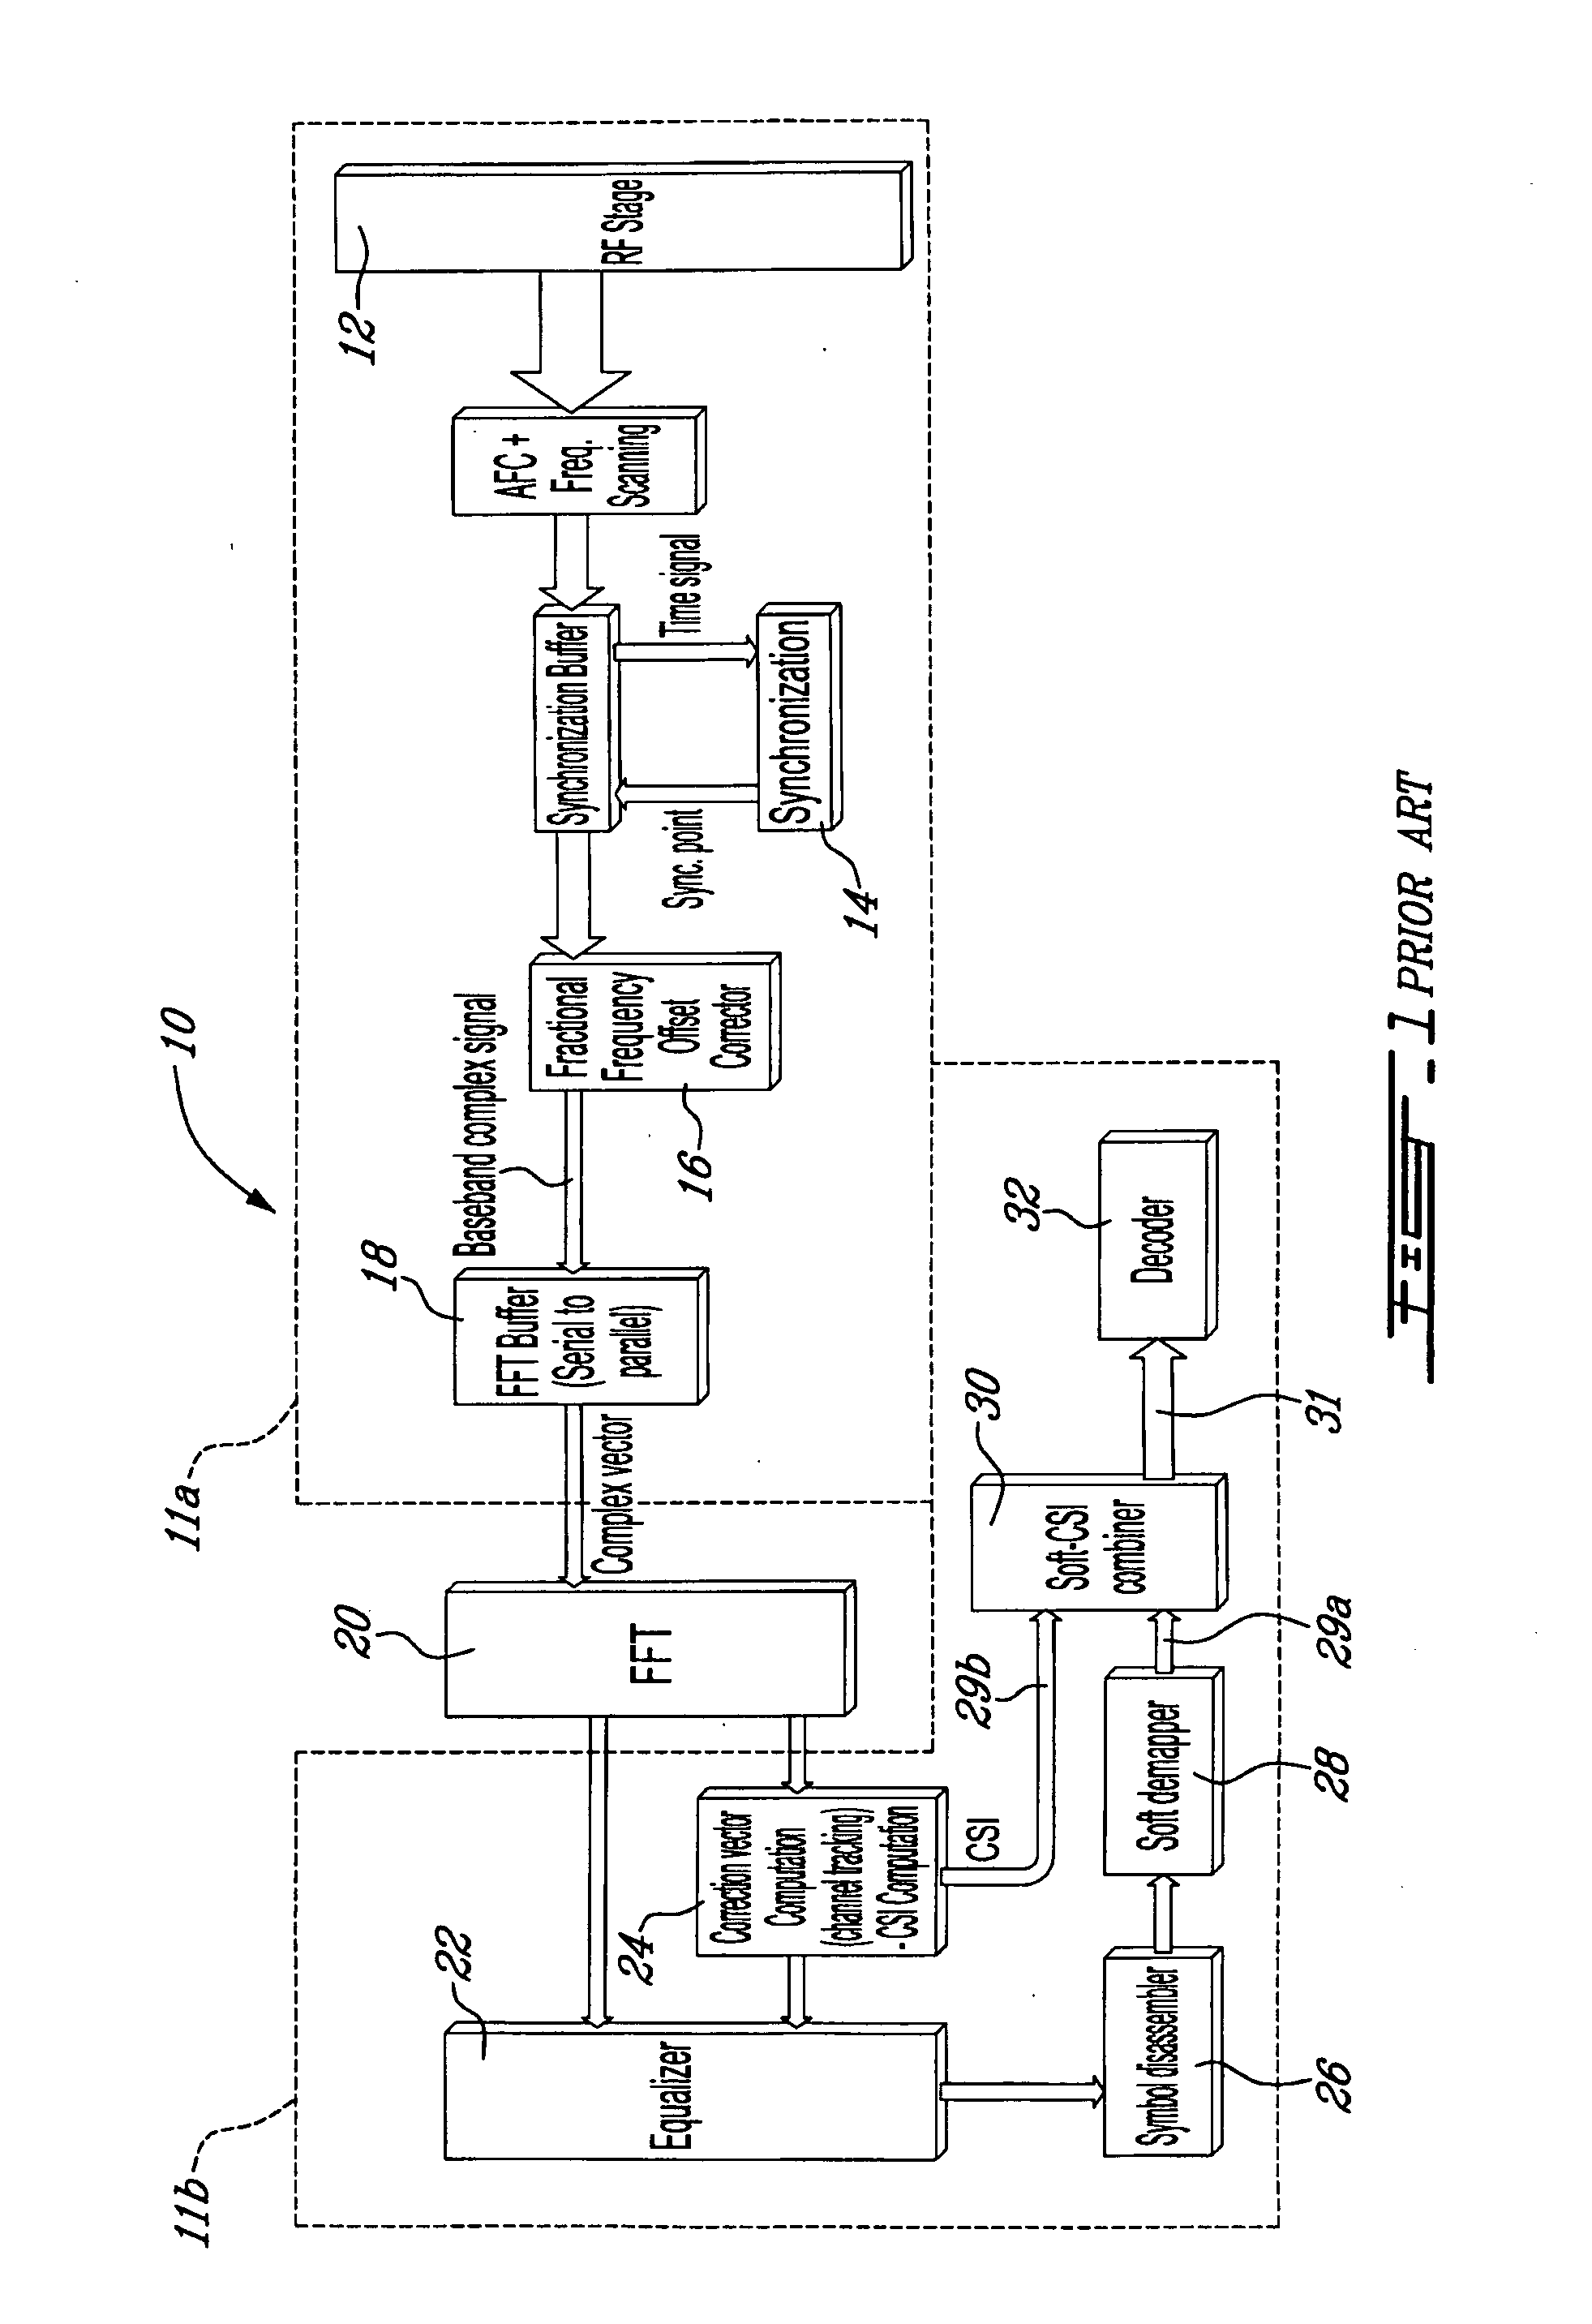 System and method for optimizing use of channel state information